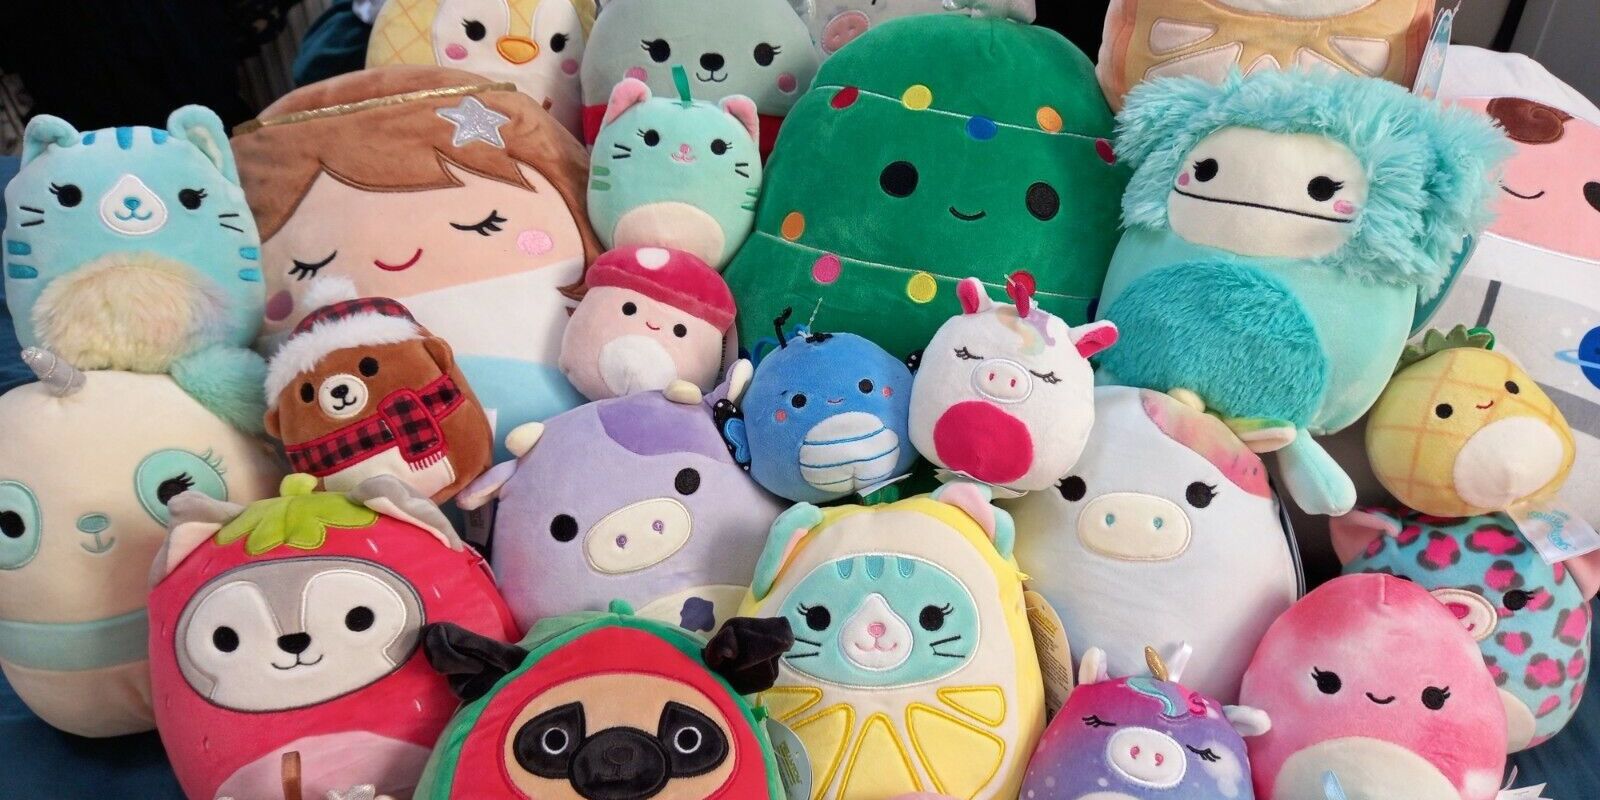 The most awesome display of Squishmallows